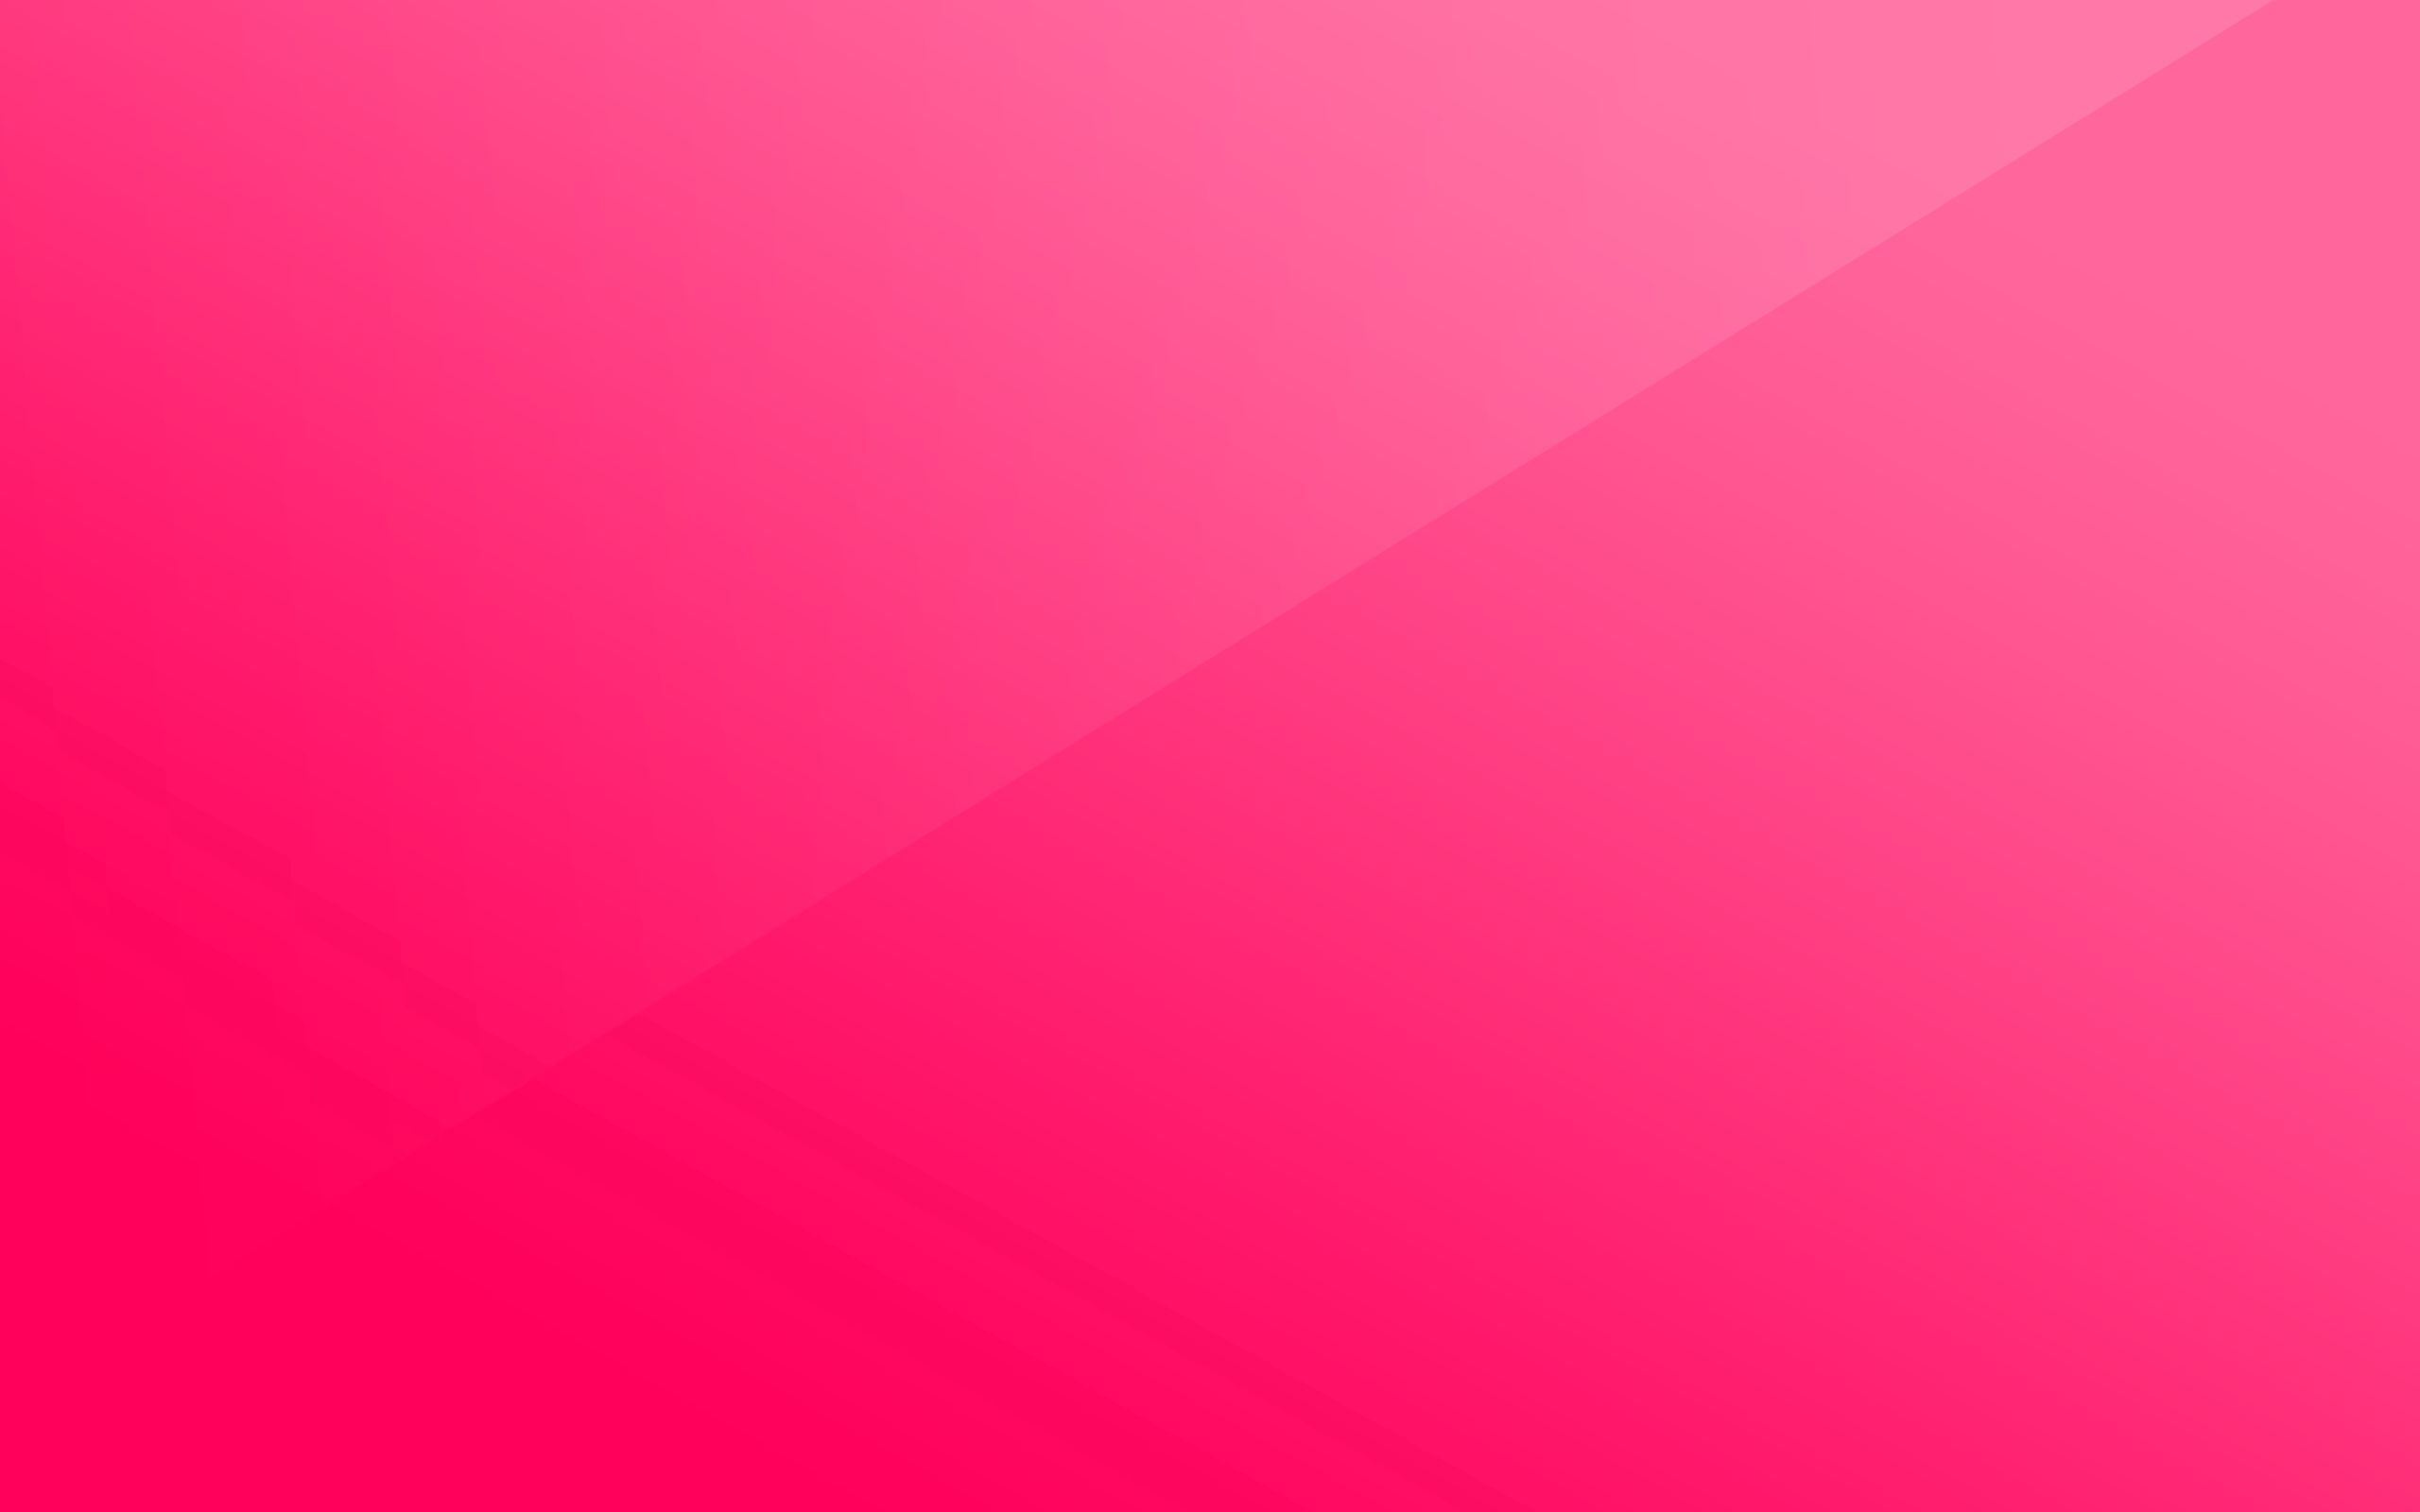 pink, bright, abstract, light, light coloured, line